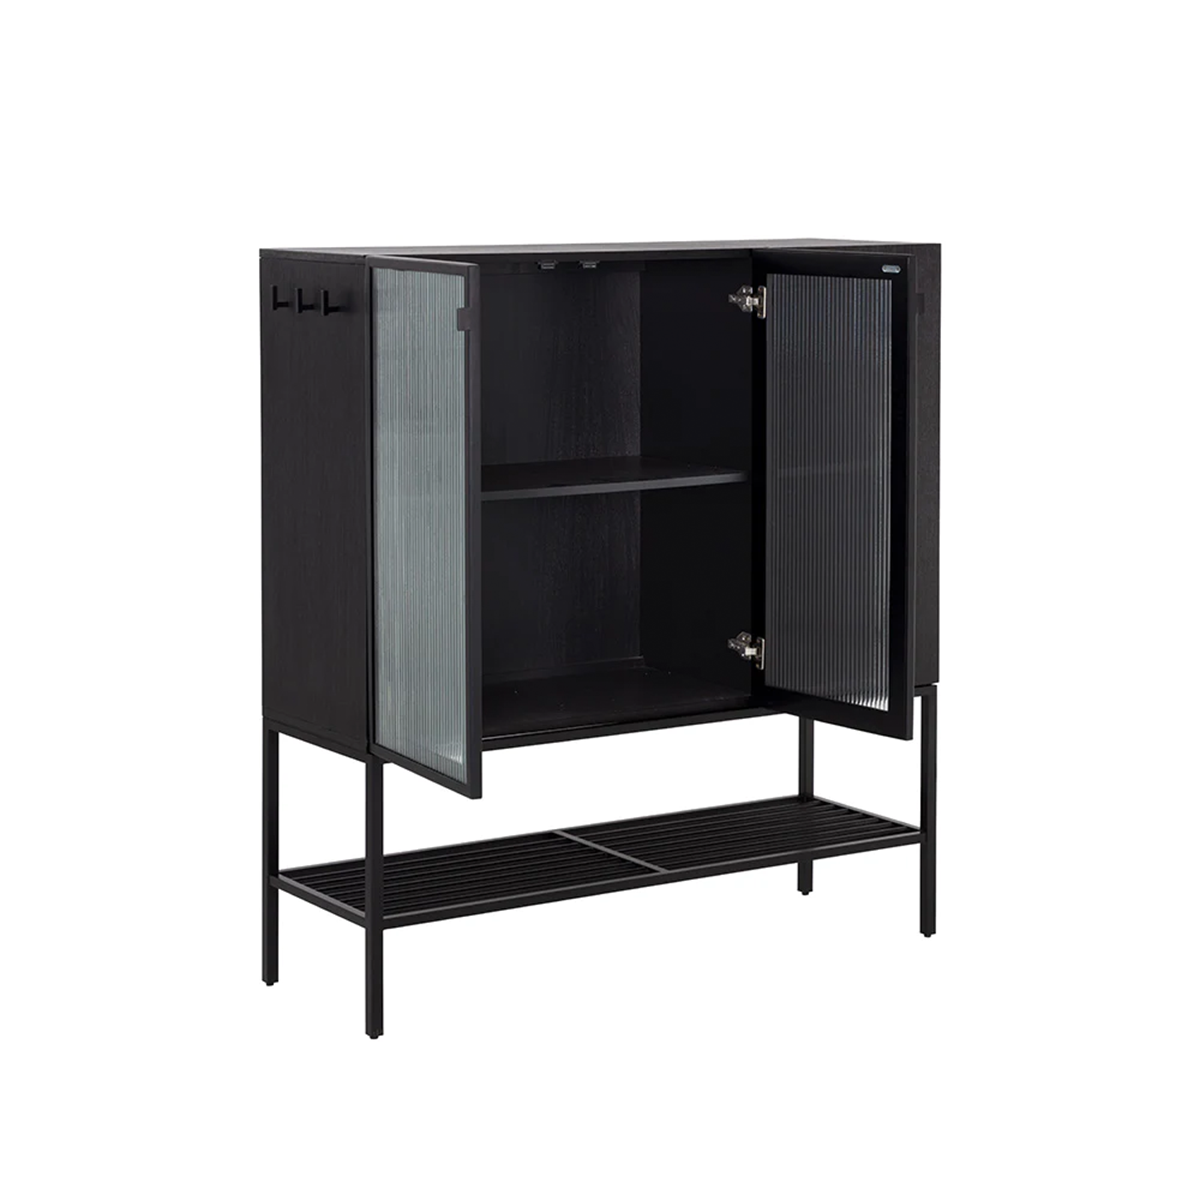 Image showing Renzo Entryway Cabinet Large by Sunpan with open doors